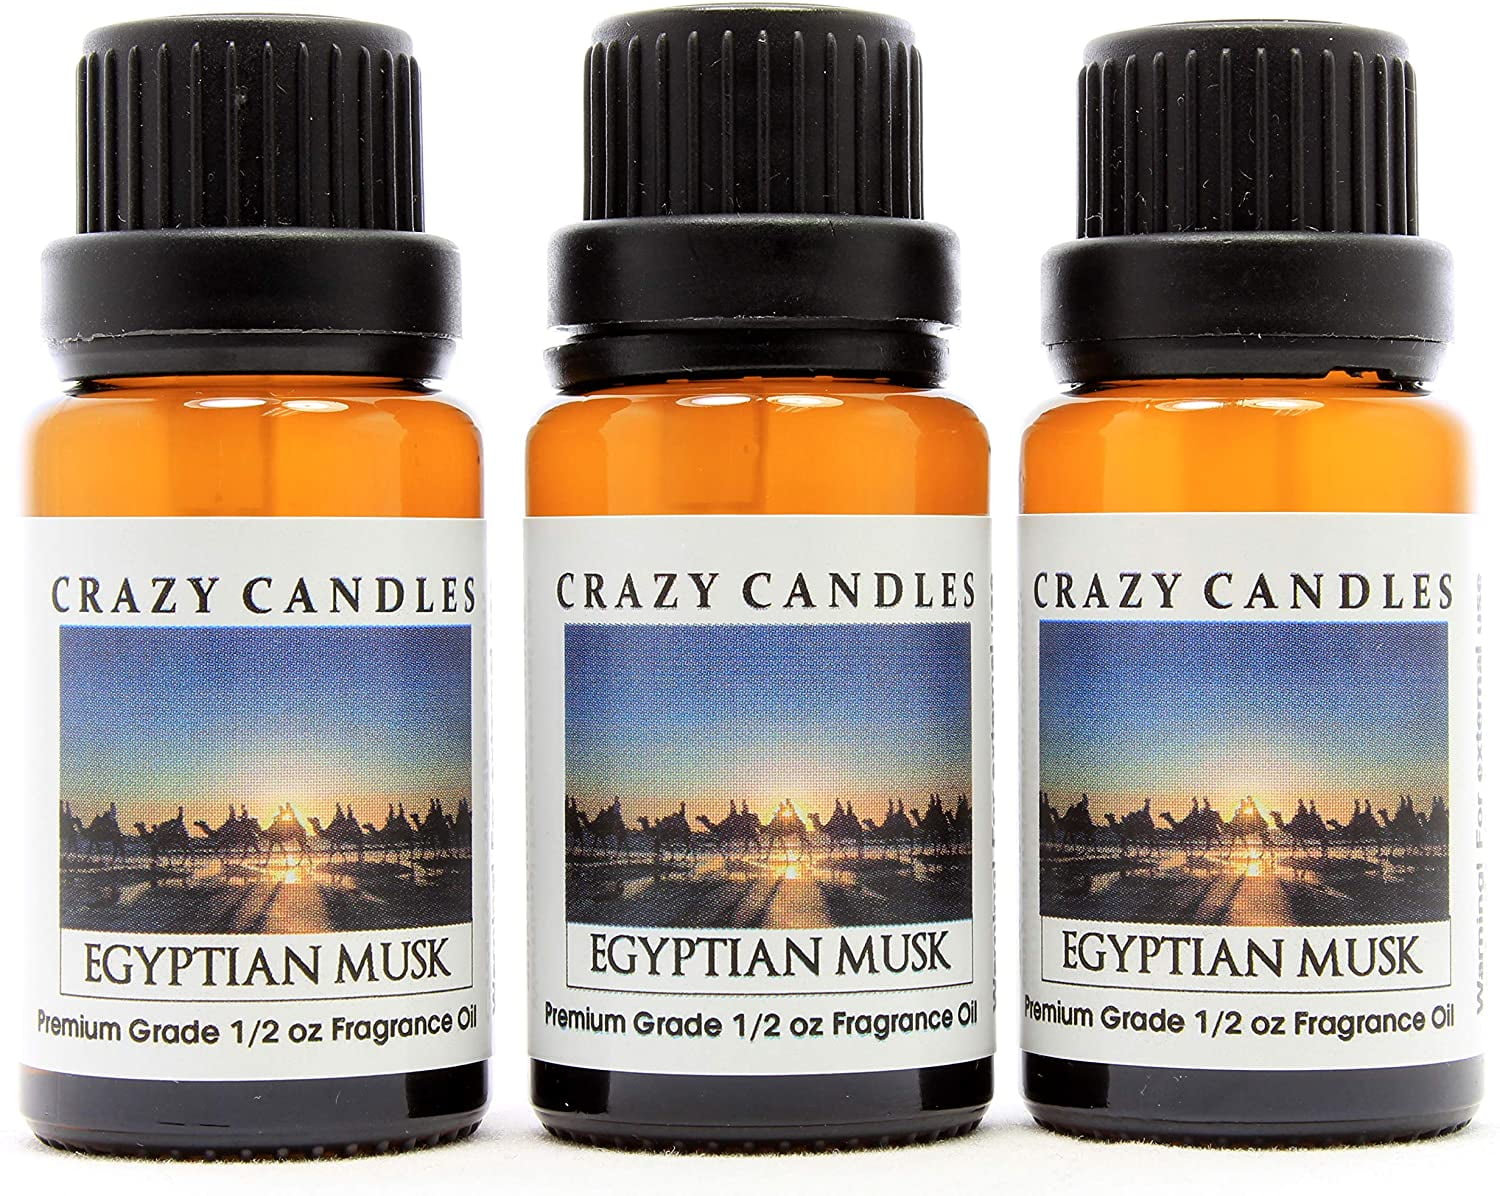 Egyptian Musk Scent Aroma Therapy Oil Home Fragrance Air Diffuser Burner 2 fl.oz